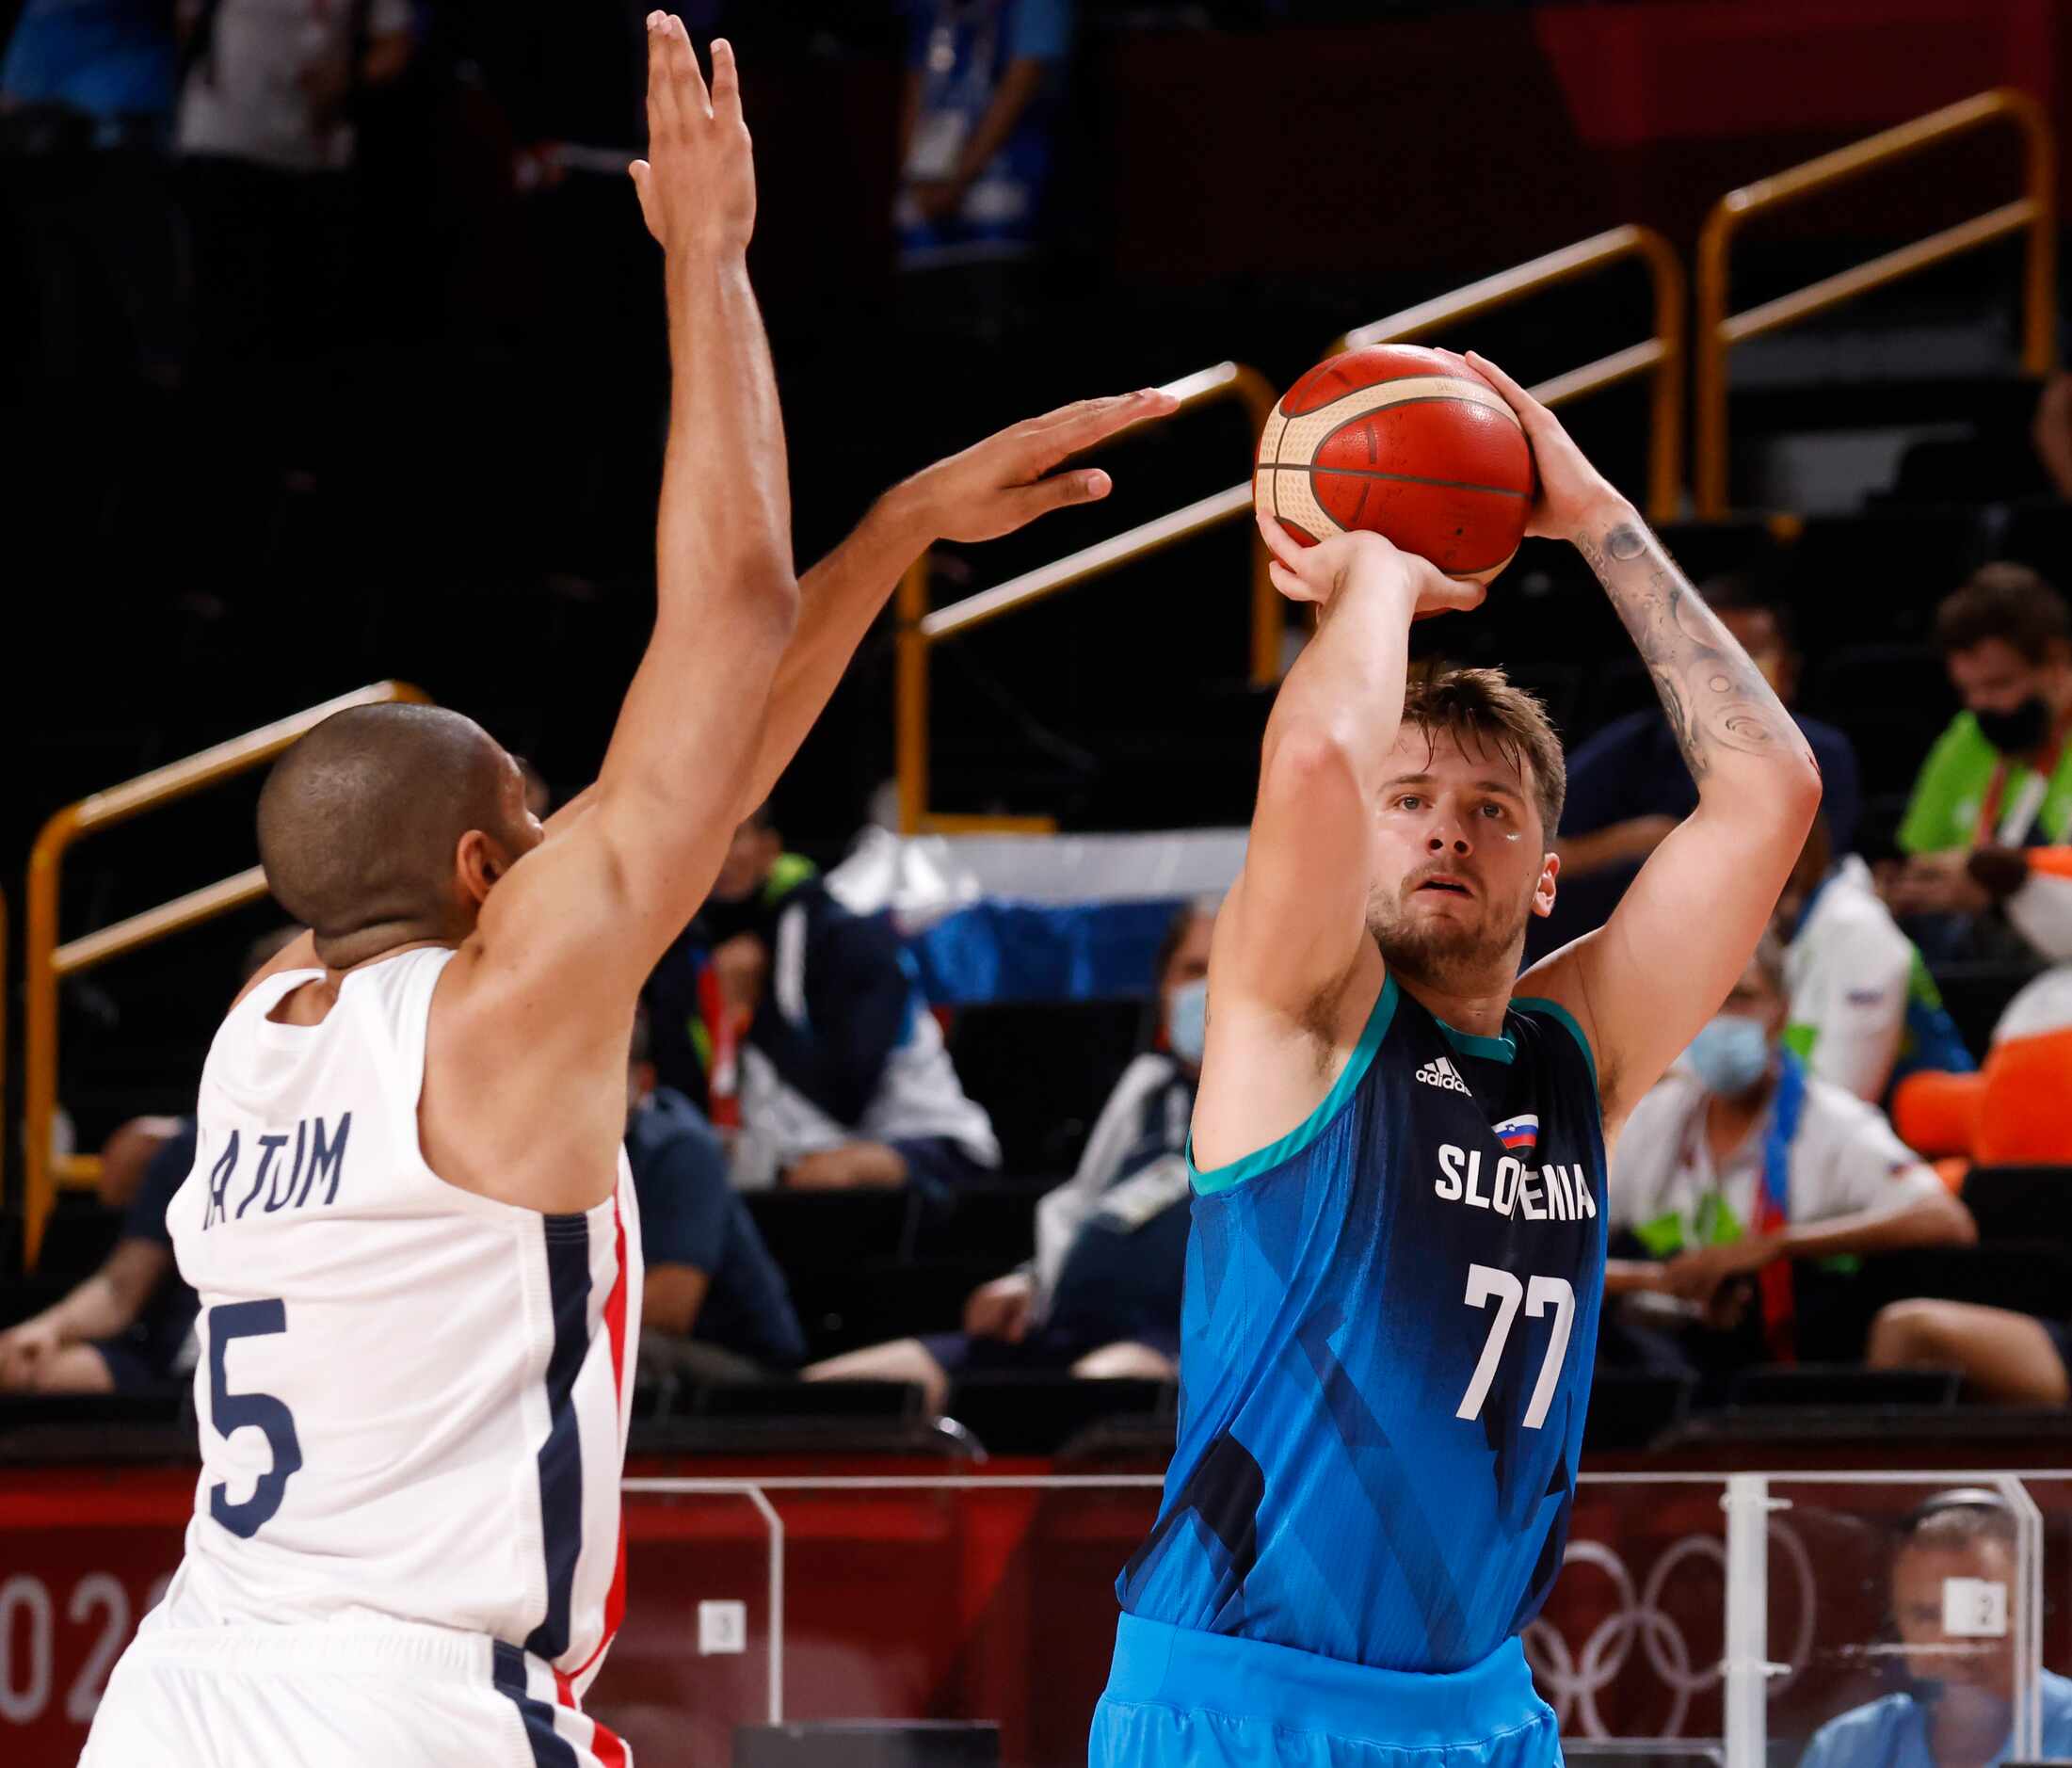 Slovenia’s Luka Doncic (77) shoots a three pointer in front of France’s Nicolas Batum (5)...